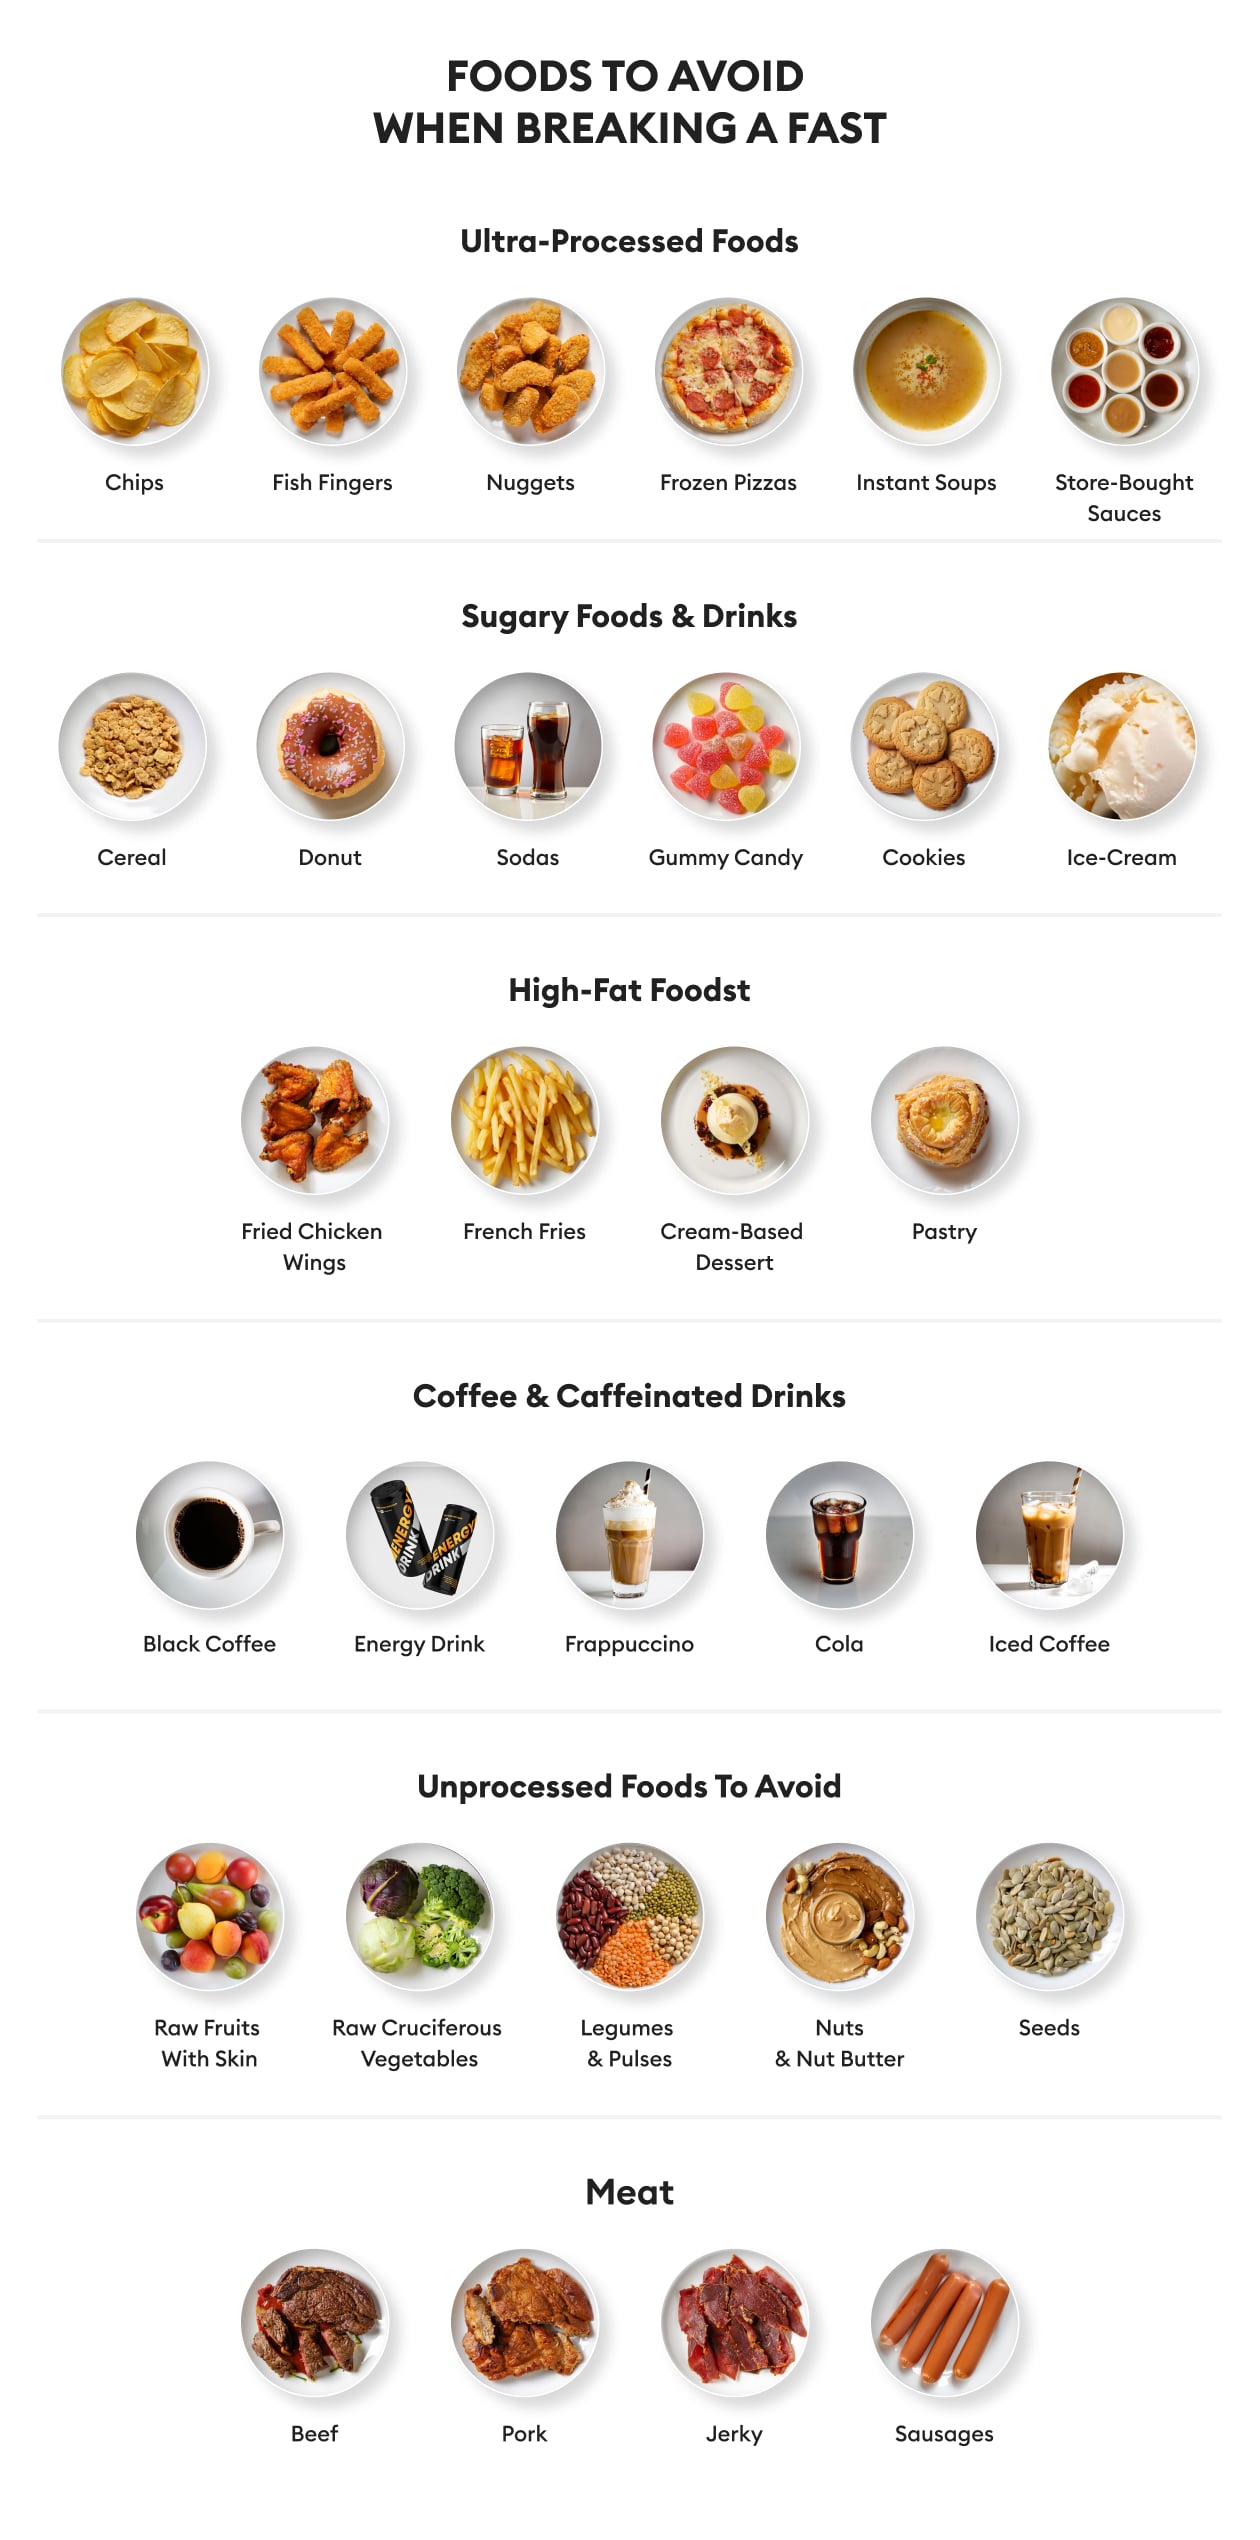 illustration of foods to avoid when breaking a fast, including processed foods, sugary foods, high-fat foods, junk food, caffeinated drinks, etc